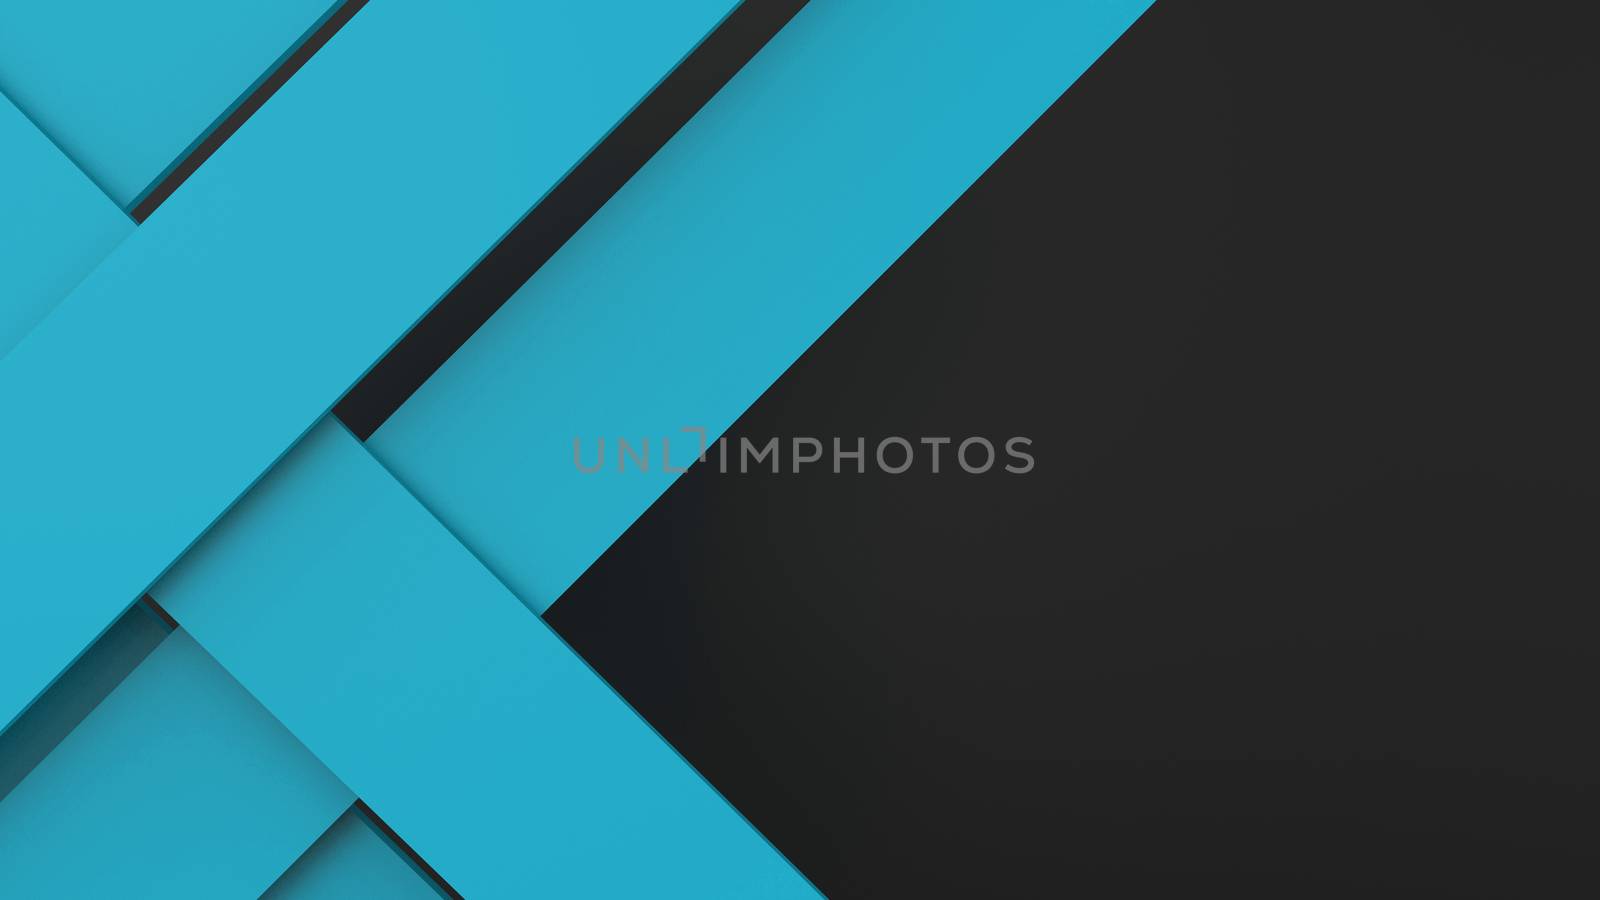 Diagonal azure dynamic stripes on black background. Modern abstract 3d render background with lines and dark shadows